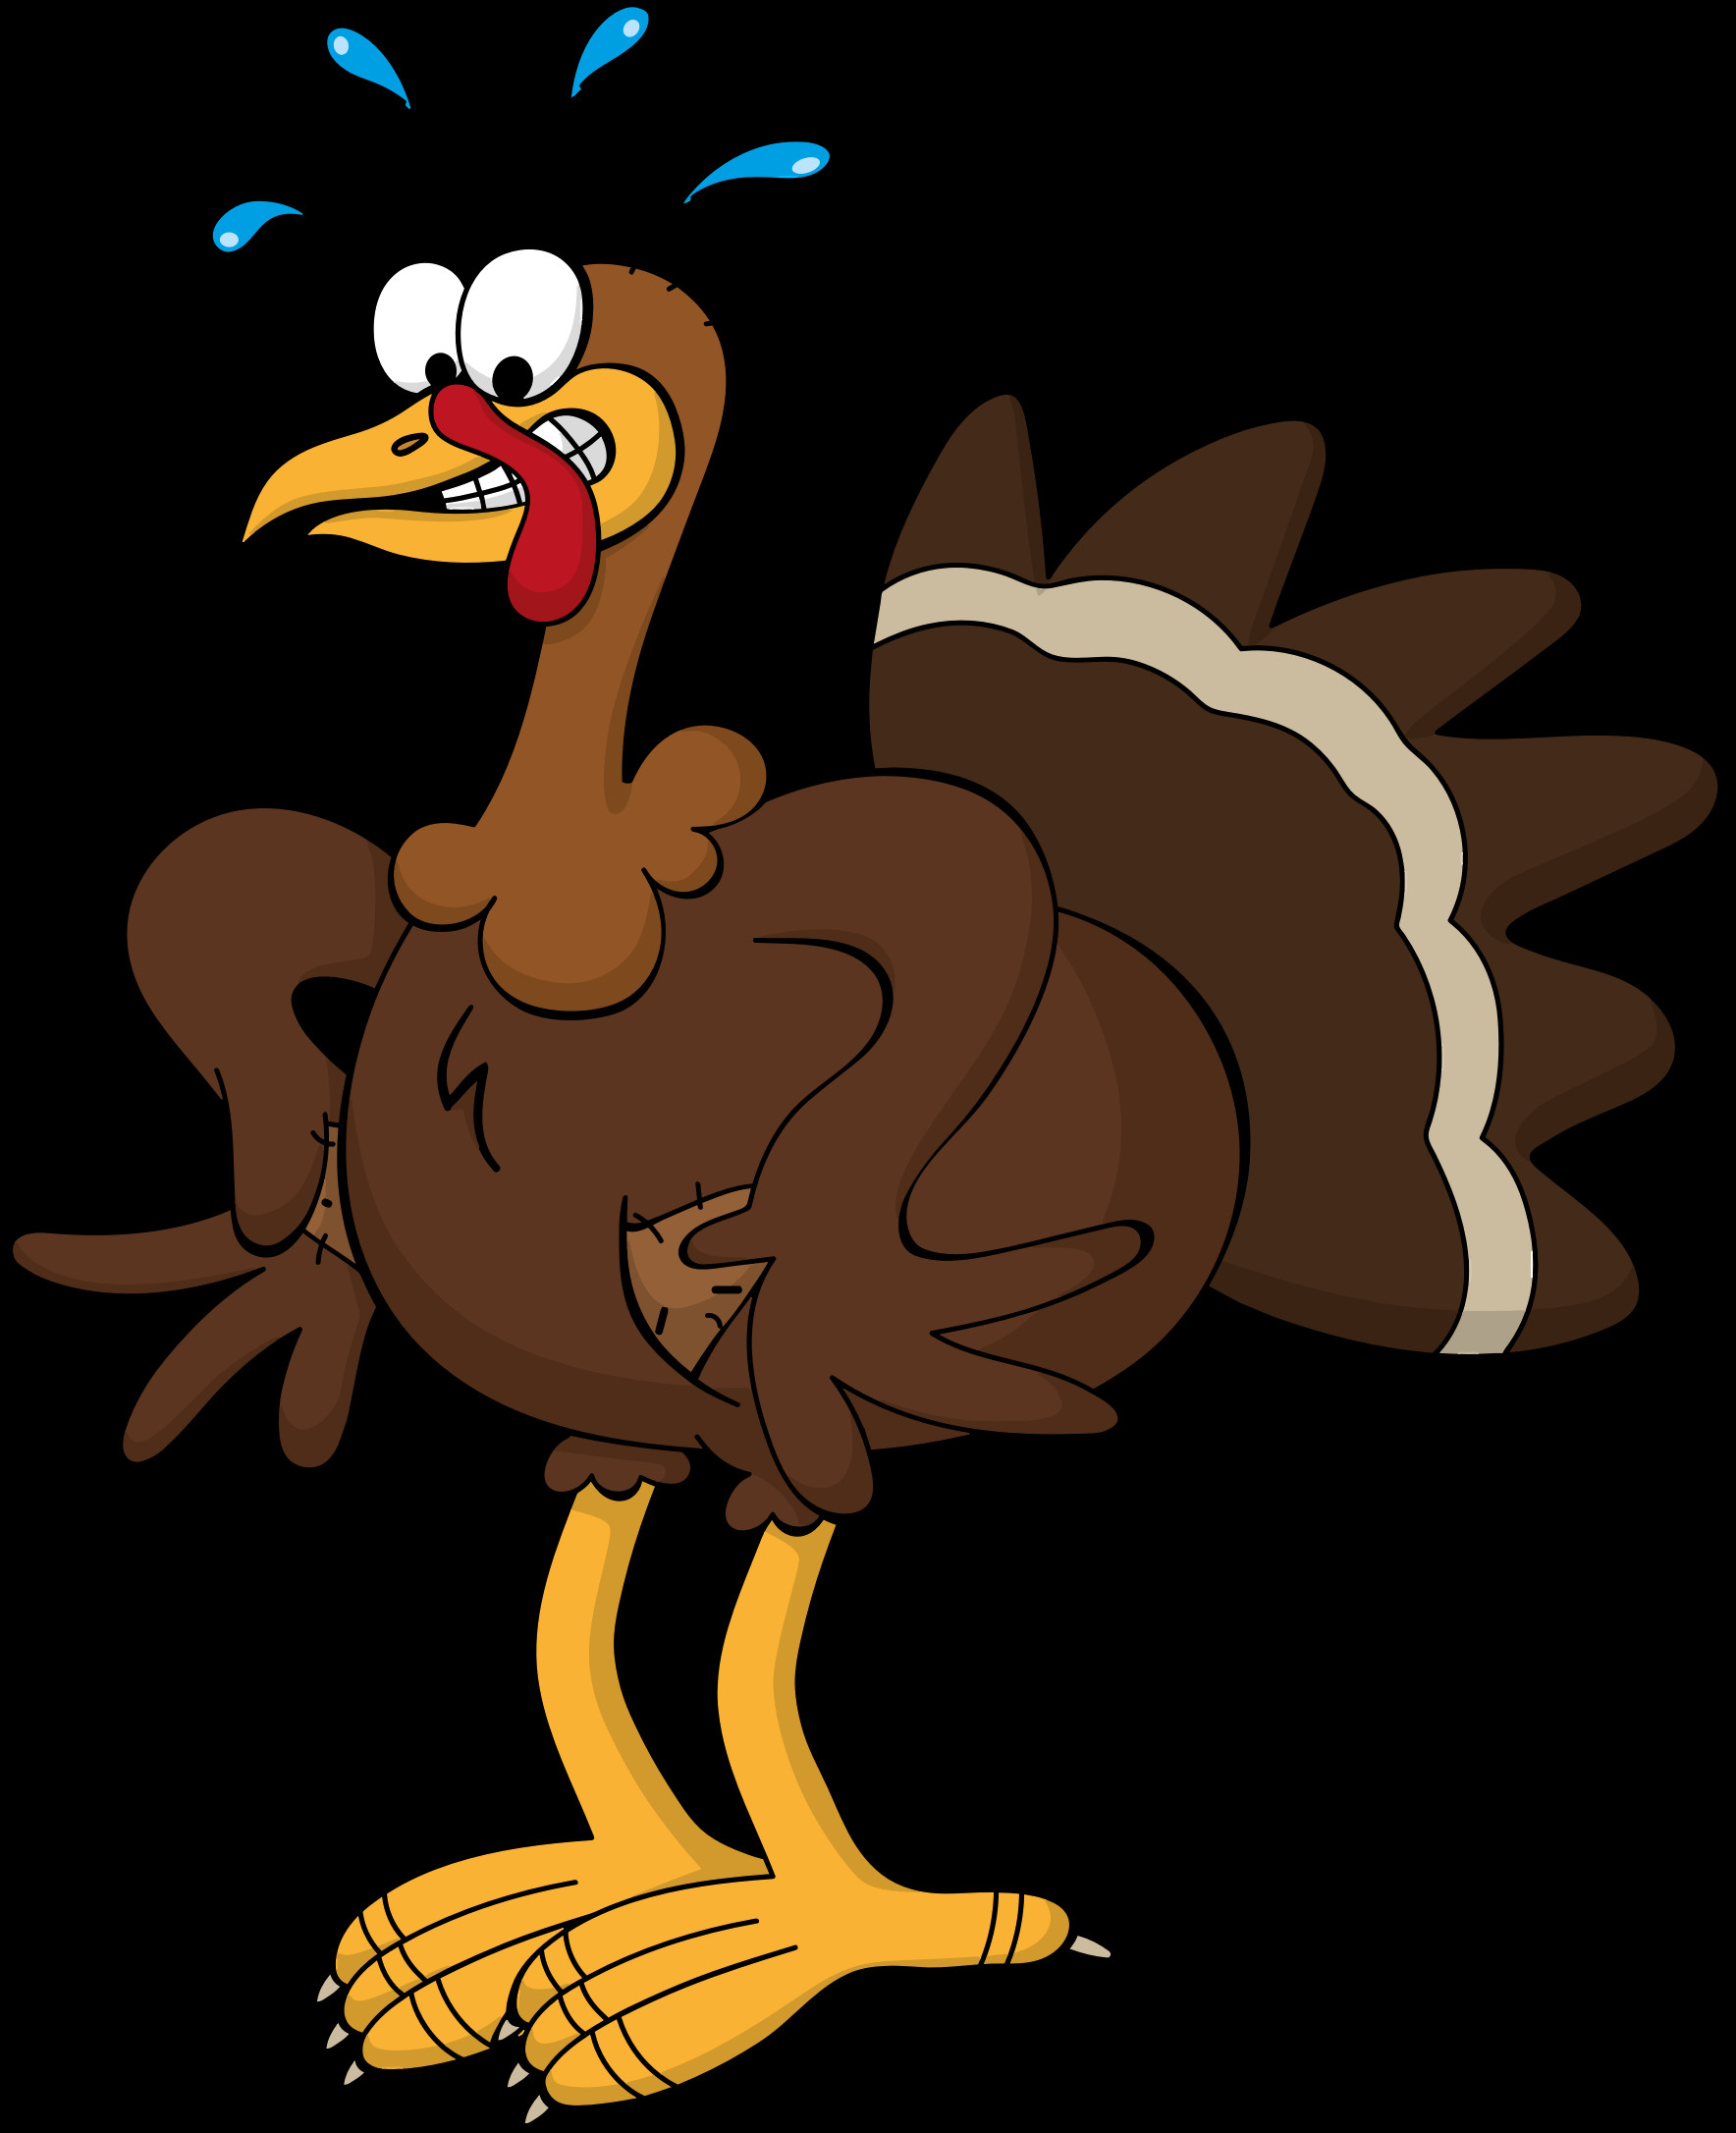 Turkey Cartoon Thanksgiving
 Turkey clipart ic Pencil and in color turkey clipart